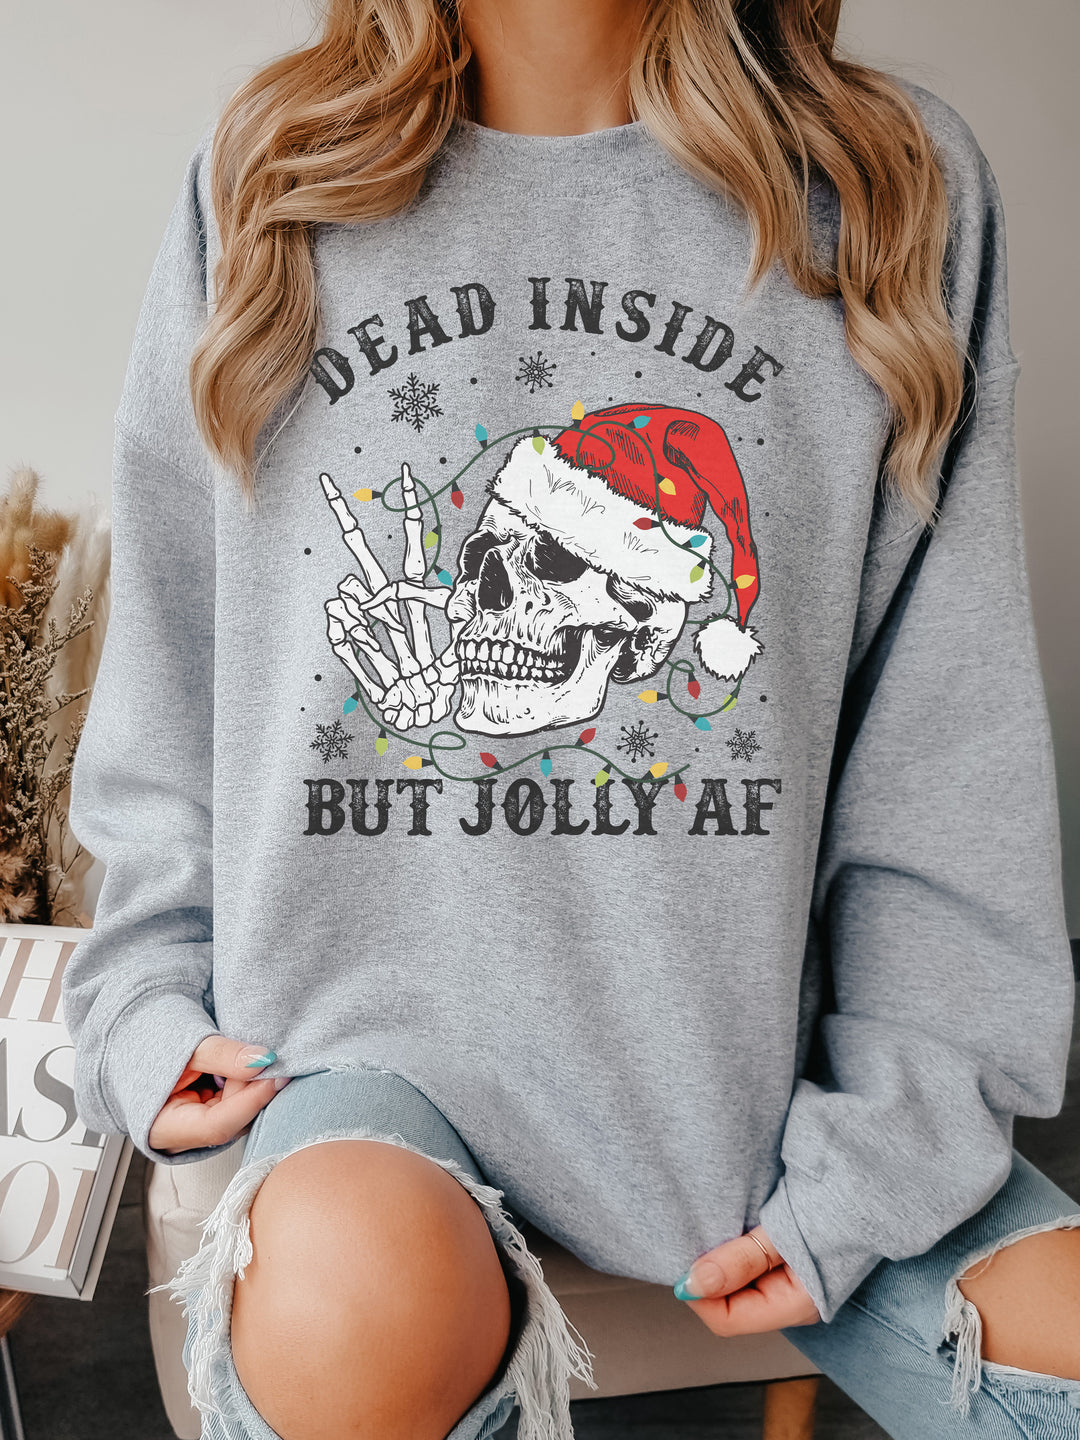 Glamfox - Dead Inside But Jolly AF Graphic Sweater